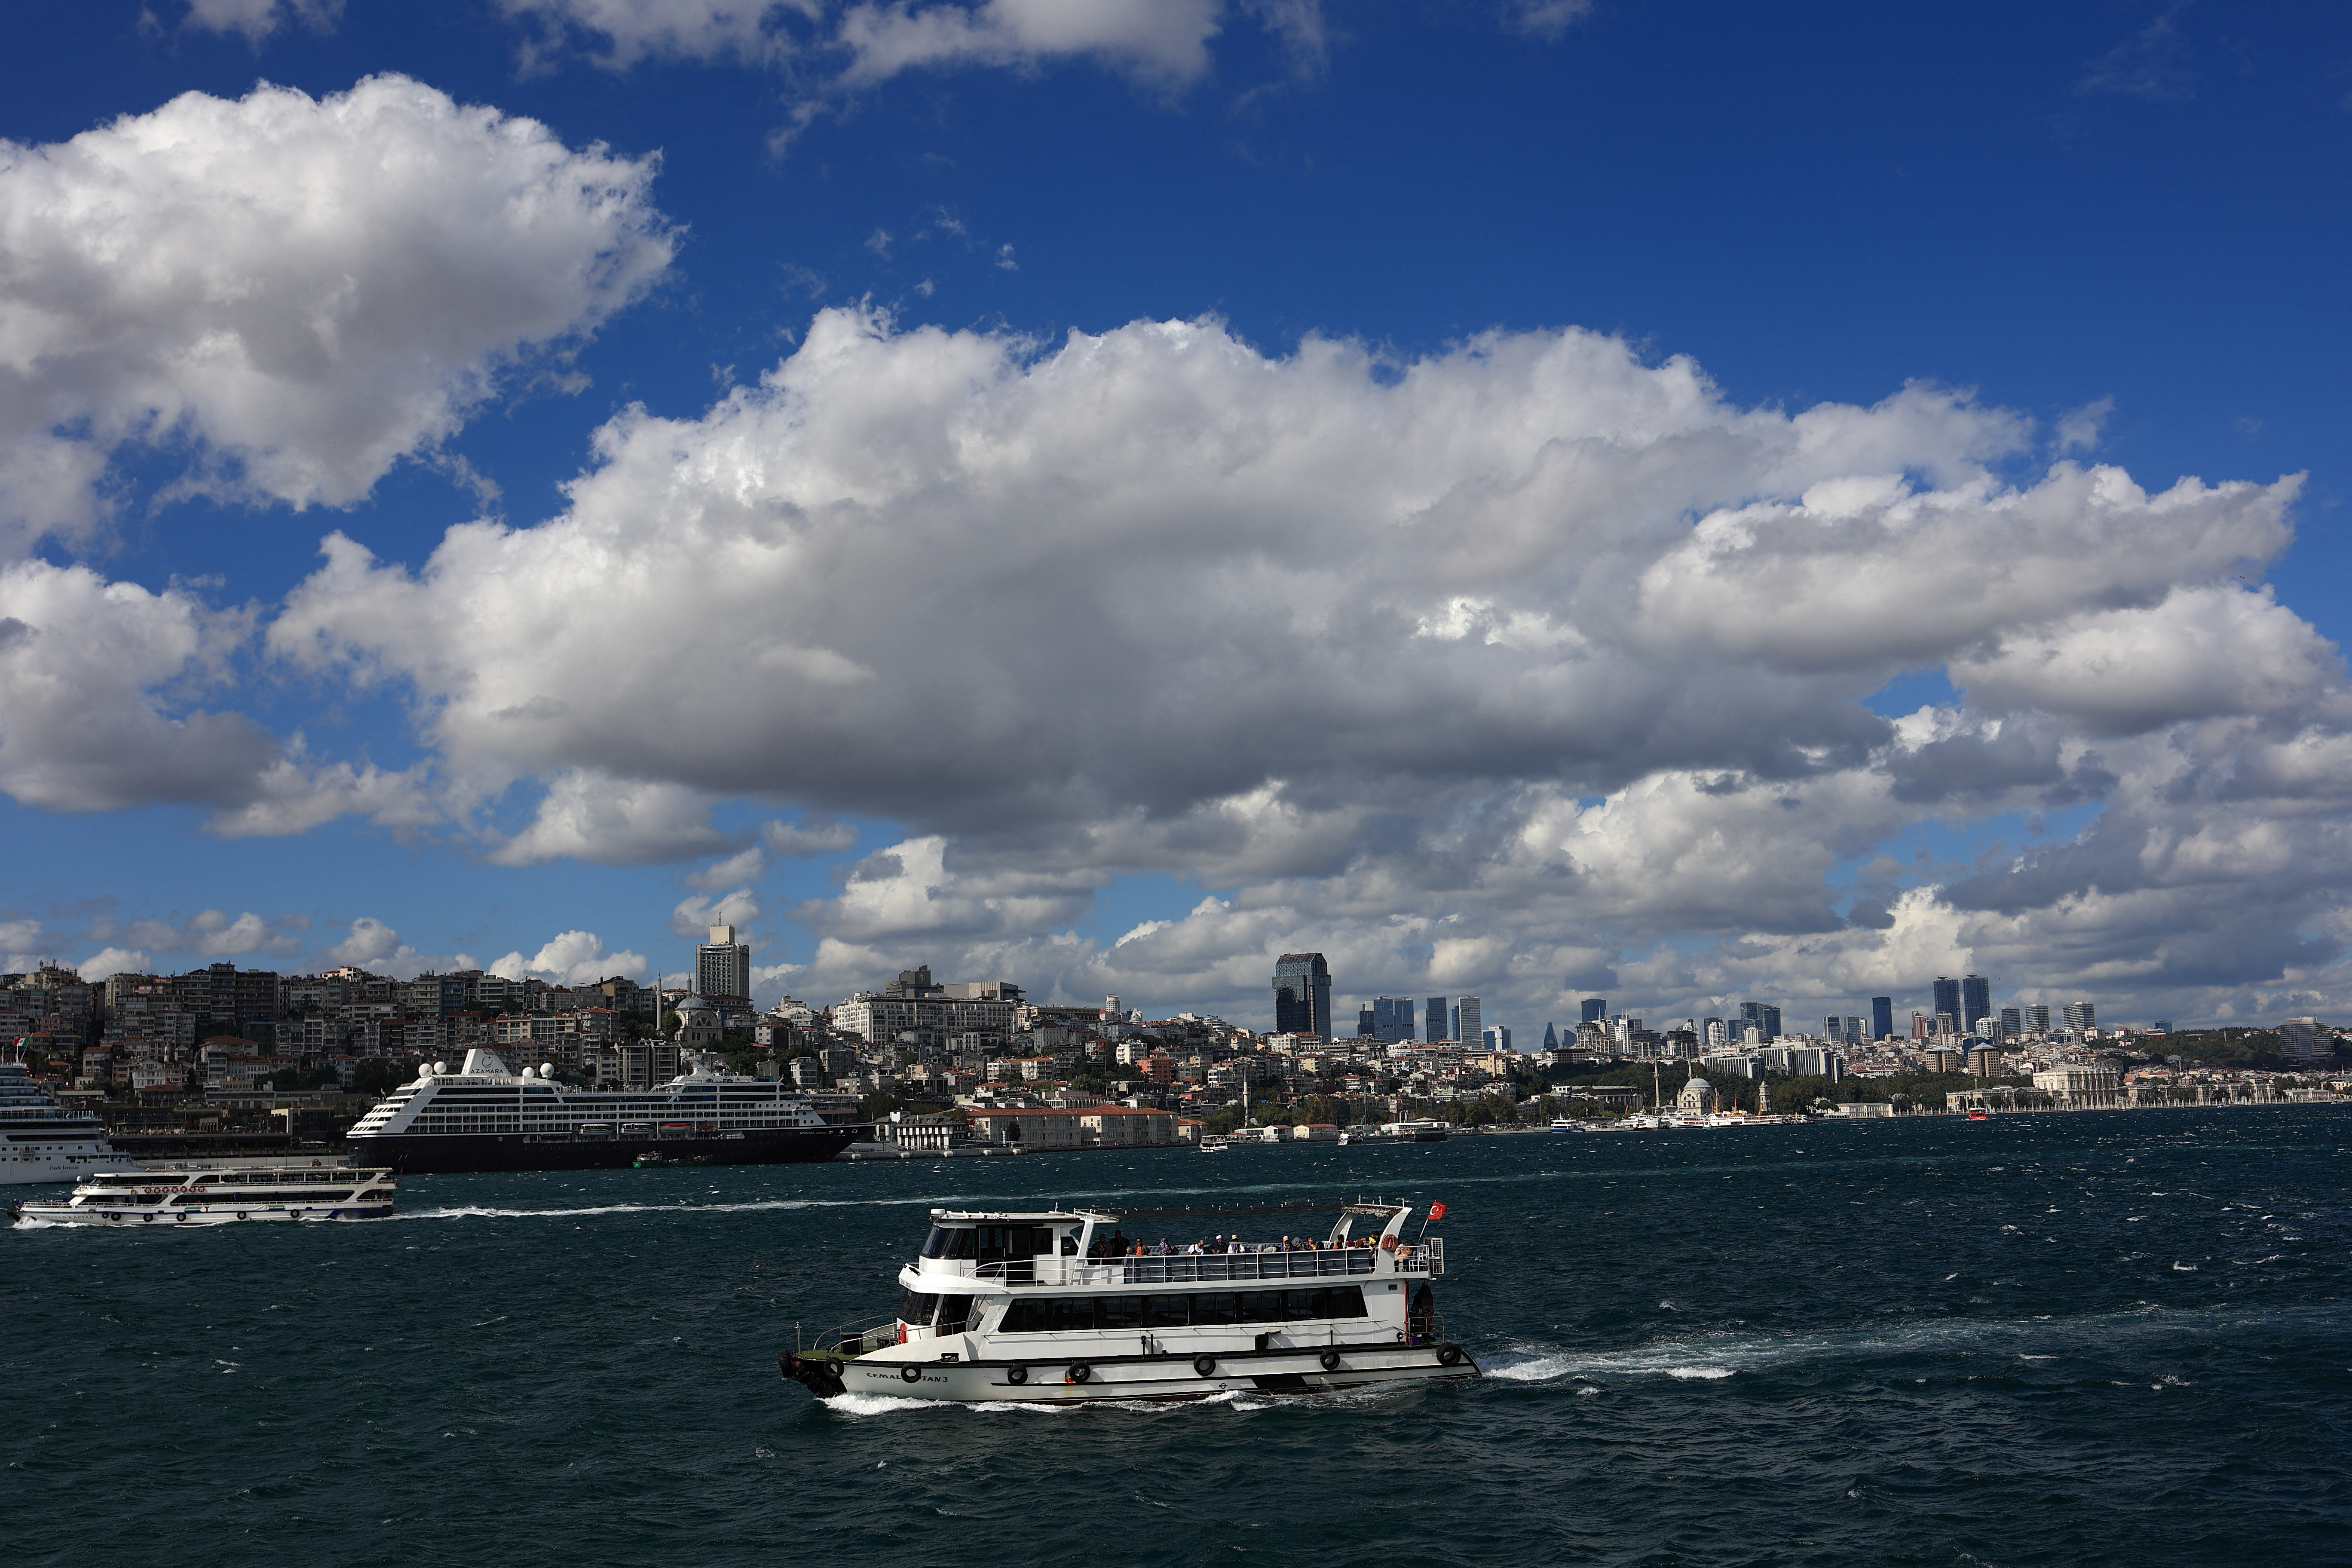 A tourist boat sails in the Bosphorus as the cruise ship Azamara Journey is docked at Galataport in Istanbul